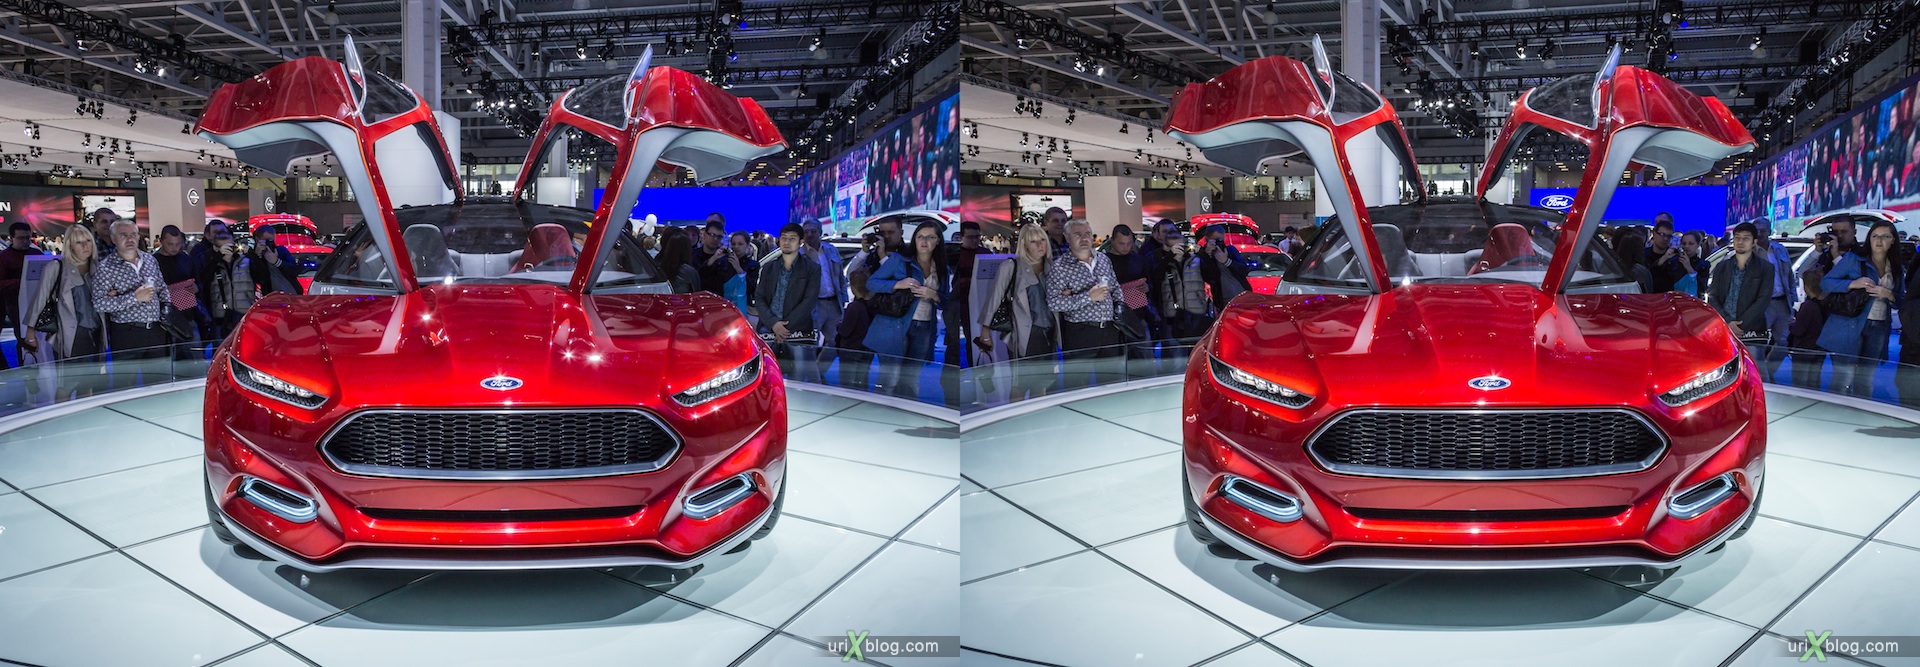 2012, Ford Evos, Moscow International Automobile Salon, auto show, 3D, stereo pair, cross-eyed, crossview